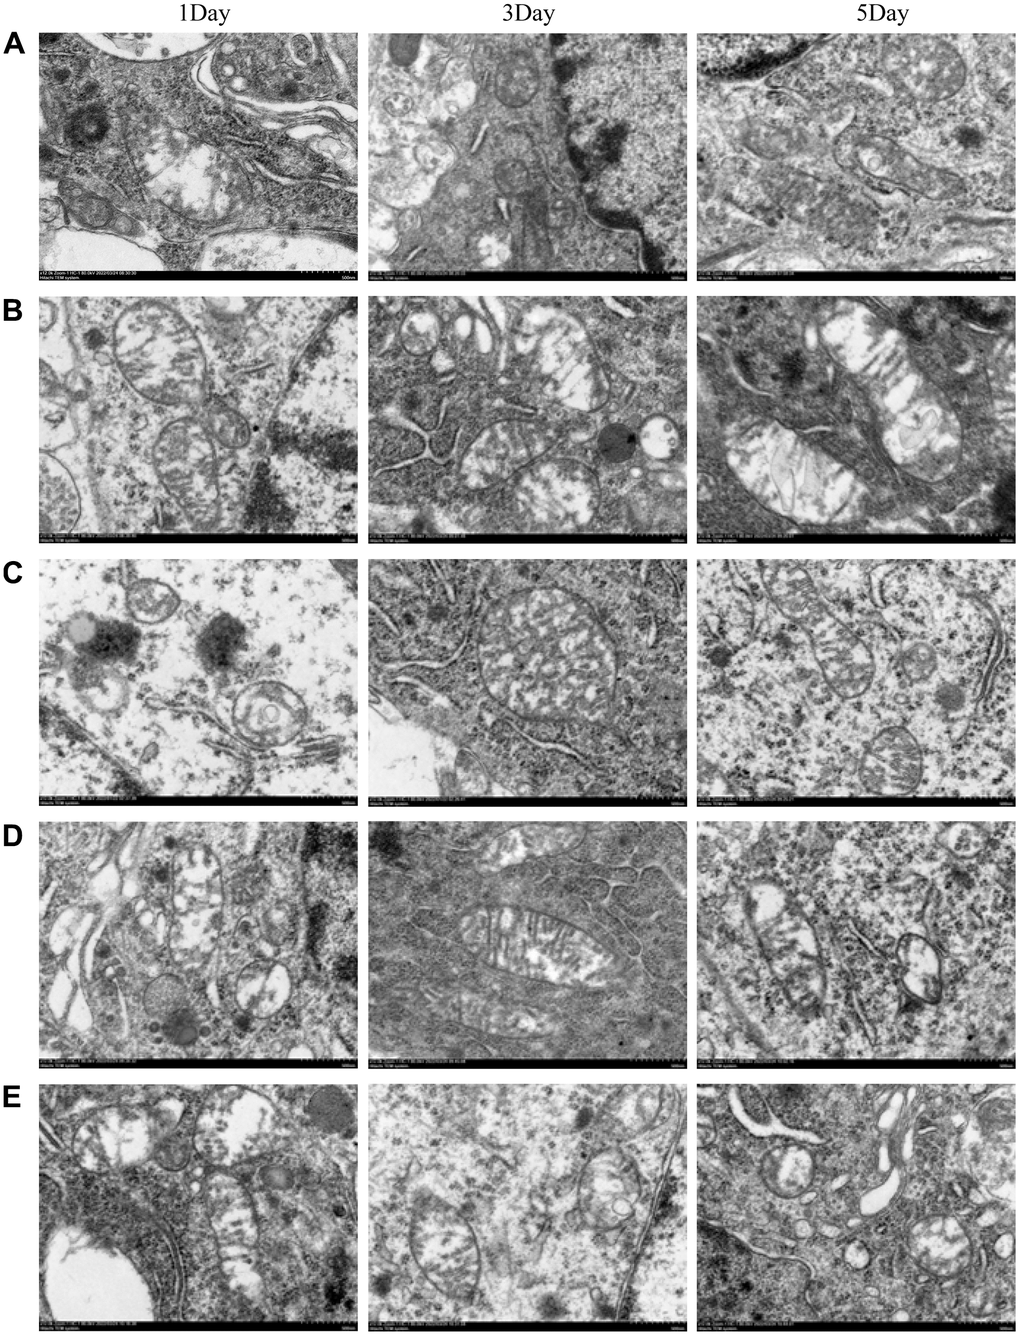 The morphological changes of mitochondria were observed by transmission electron microscopy. (A) blank group, (B) solvent group, (C) NBP group, (D) NBP + agonist group, and (E) NBP + inhibitor group. (Scale bar = 20 μm, magnification = 1200x).